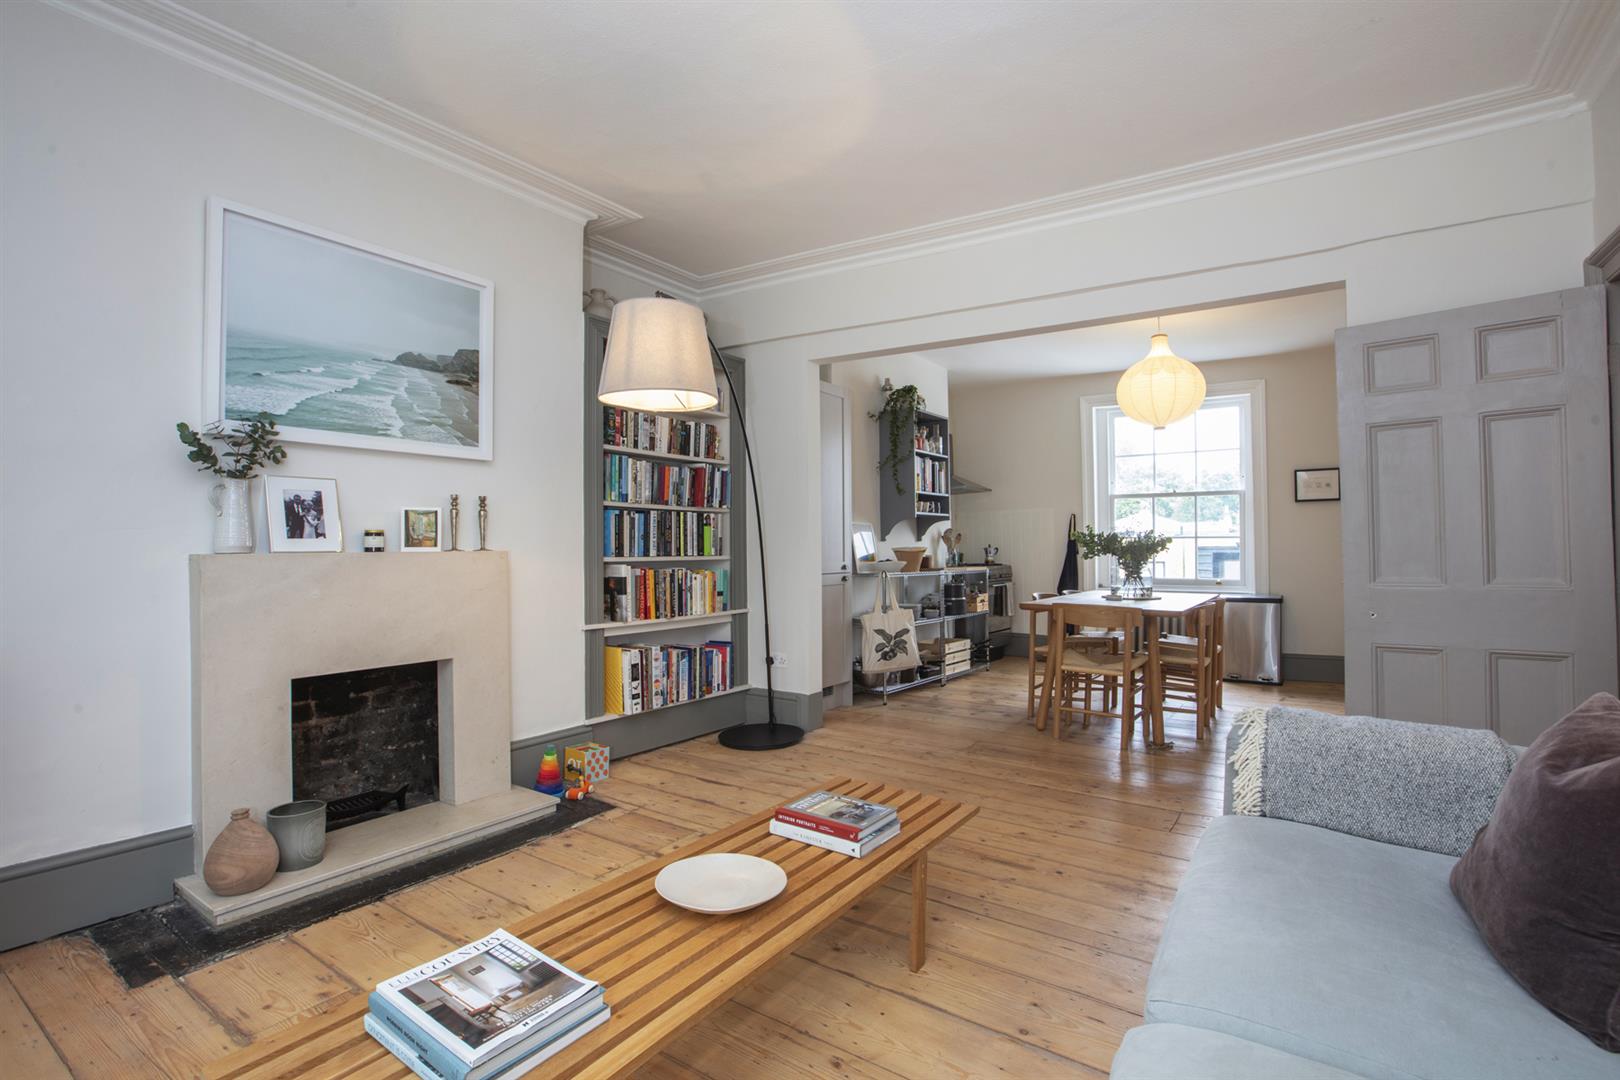 Flat - Conversion For Sale in Grove Lane, Camberwell, SE5 944 view6